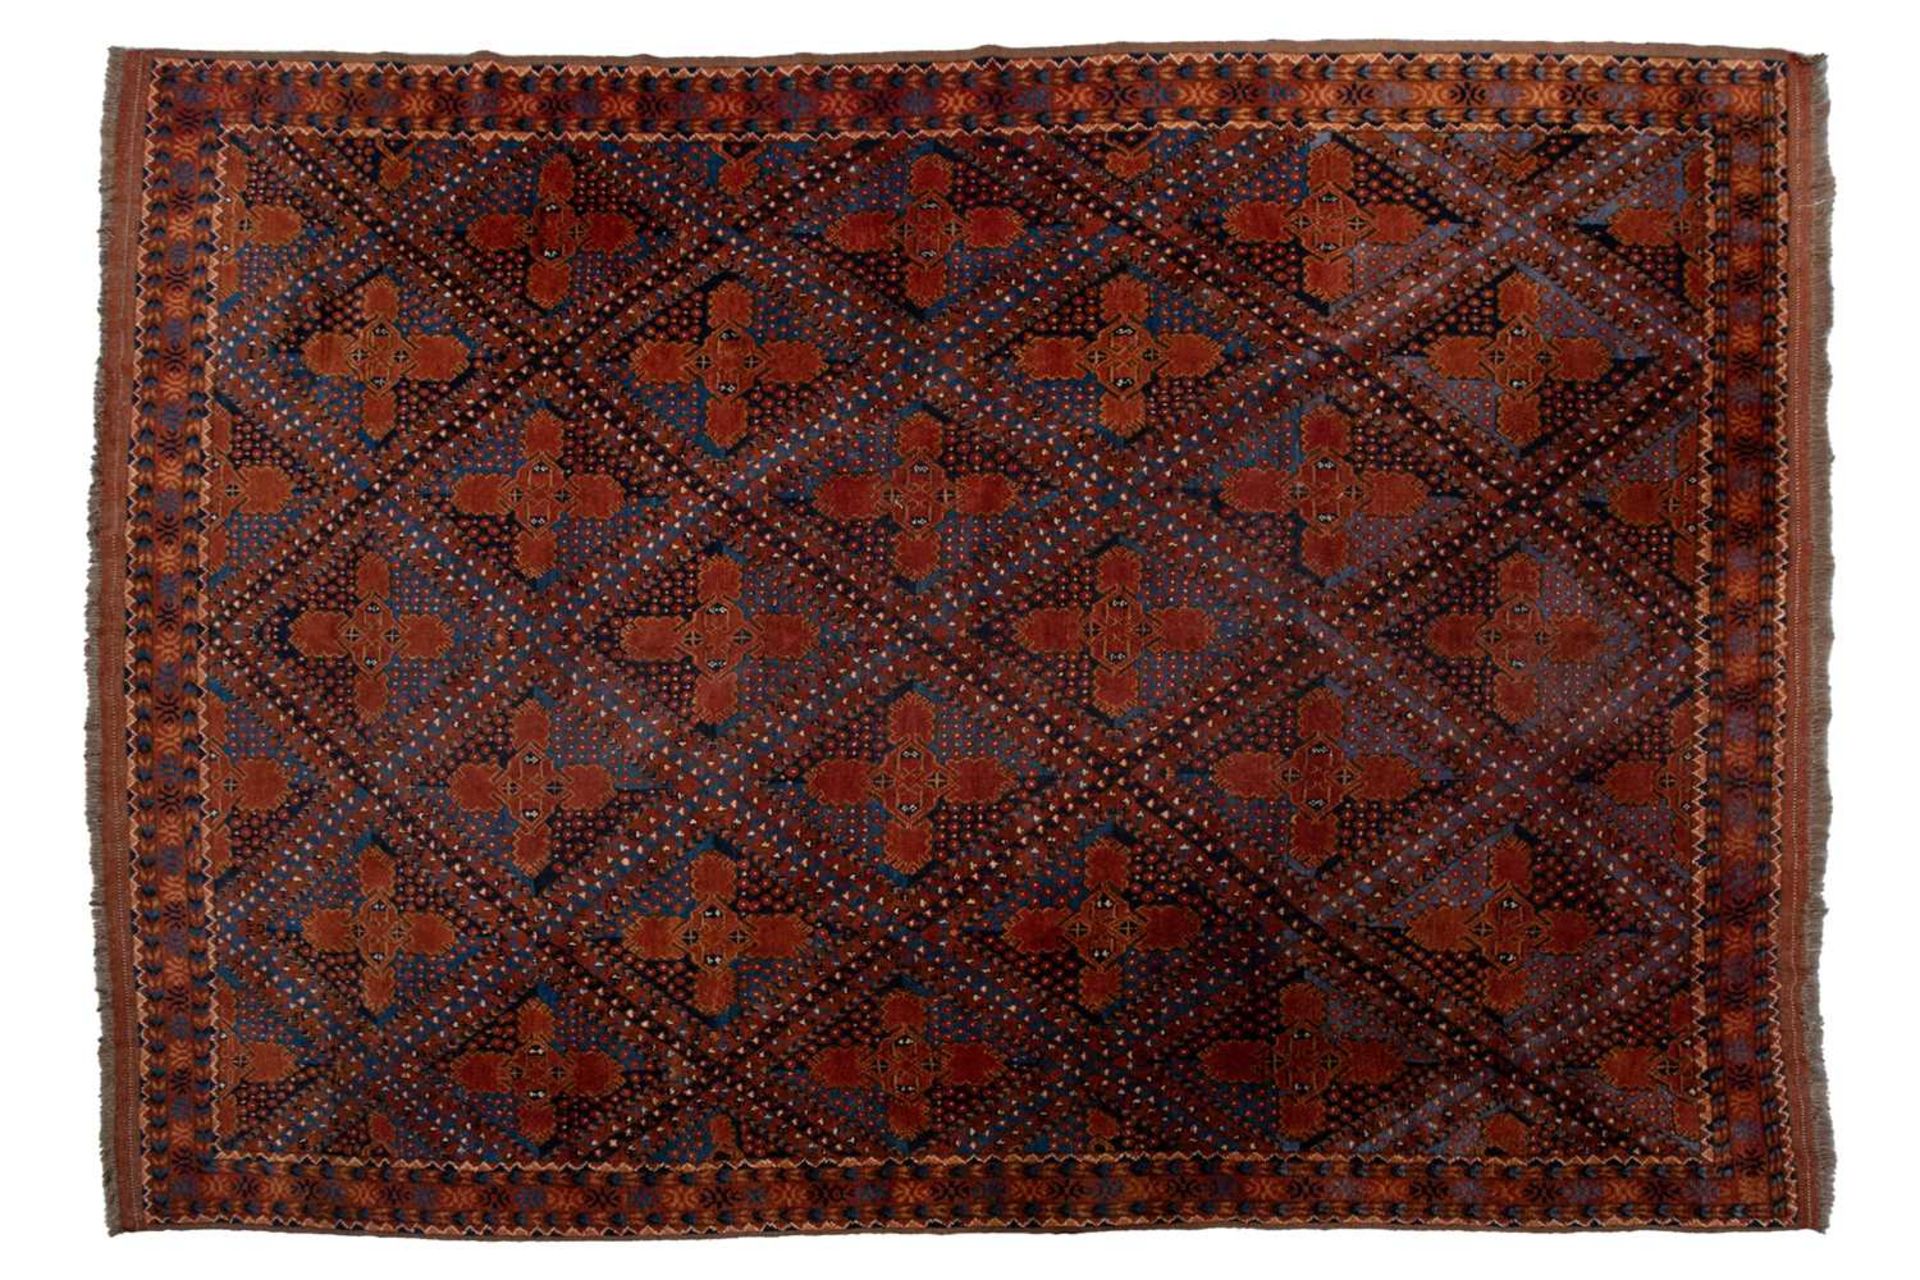 A large brick red/brown ground Qashqai rug with blue St. Andrew's cross filled diamond pattern